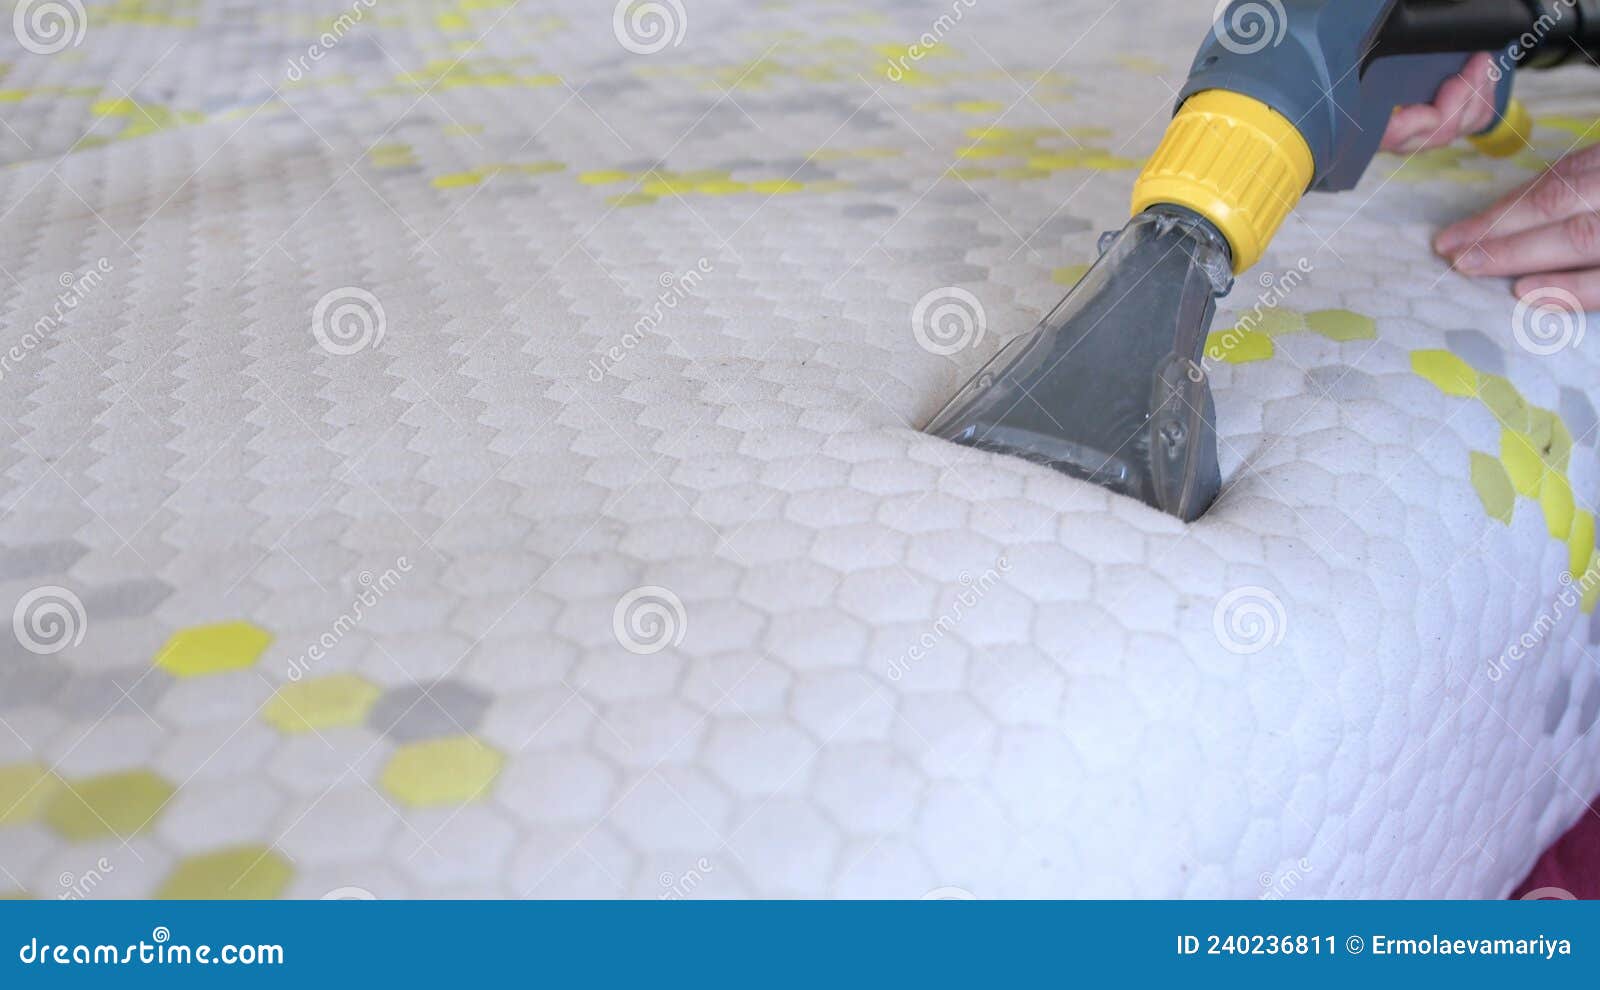 male worker cleaning a mattress with vacuum cleaner.professionally extraction method. upholstered furniture. mattress